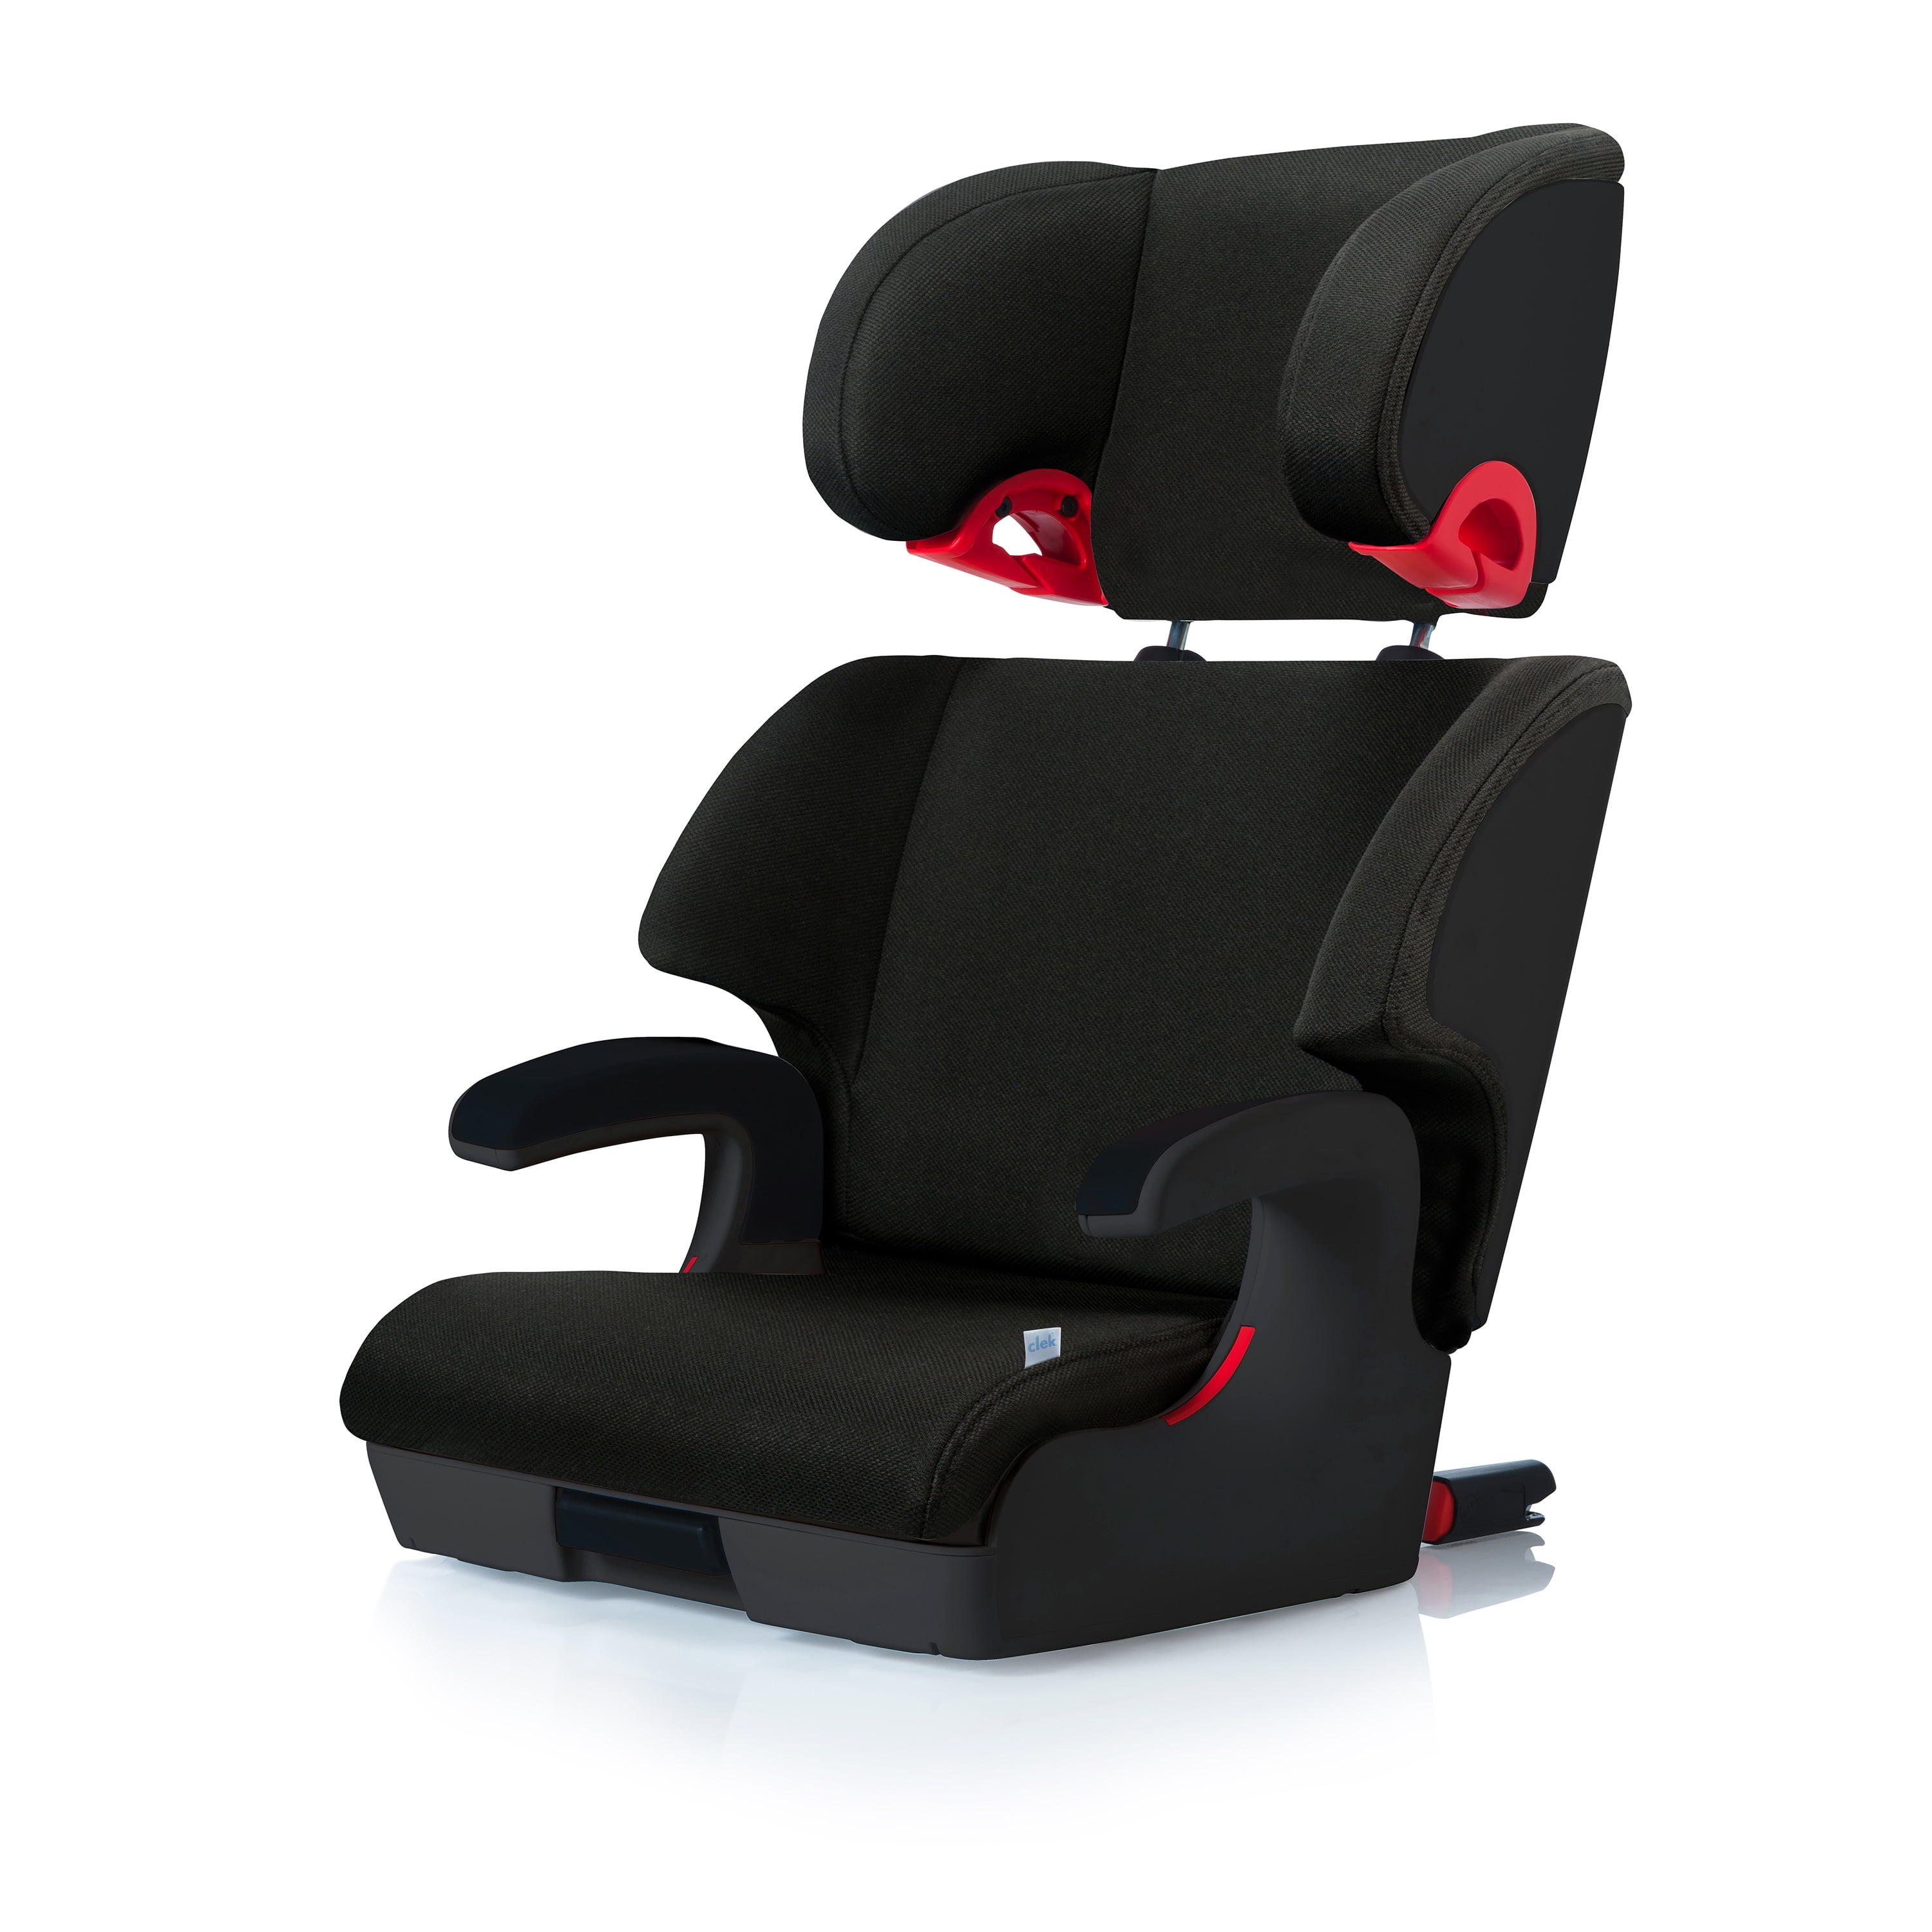 Choosing the most comfortable booster seat for long trips (2021